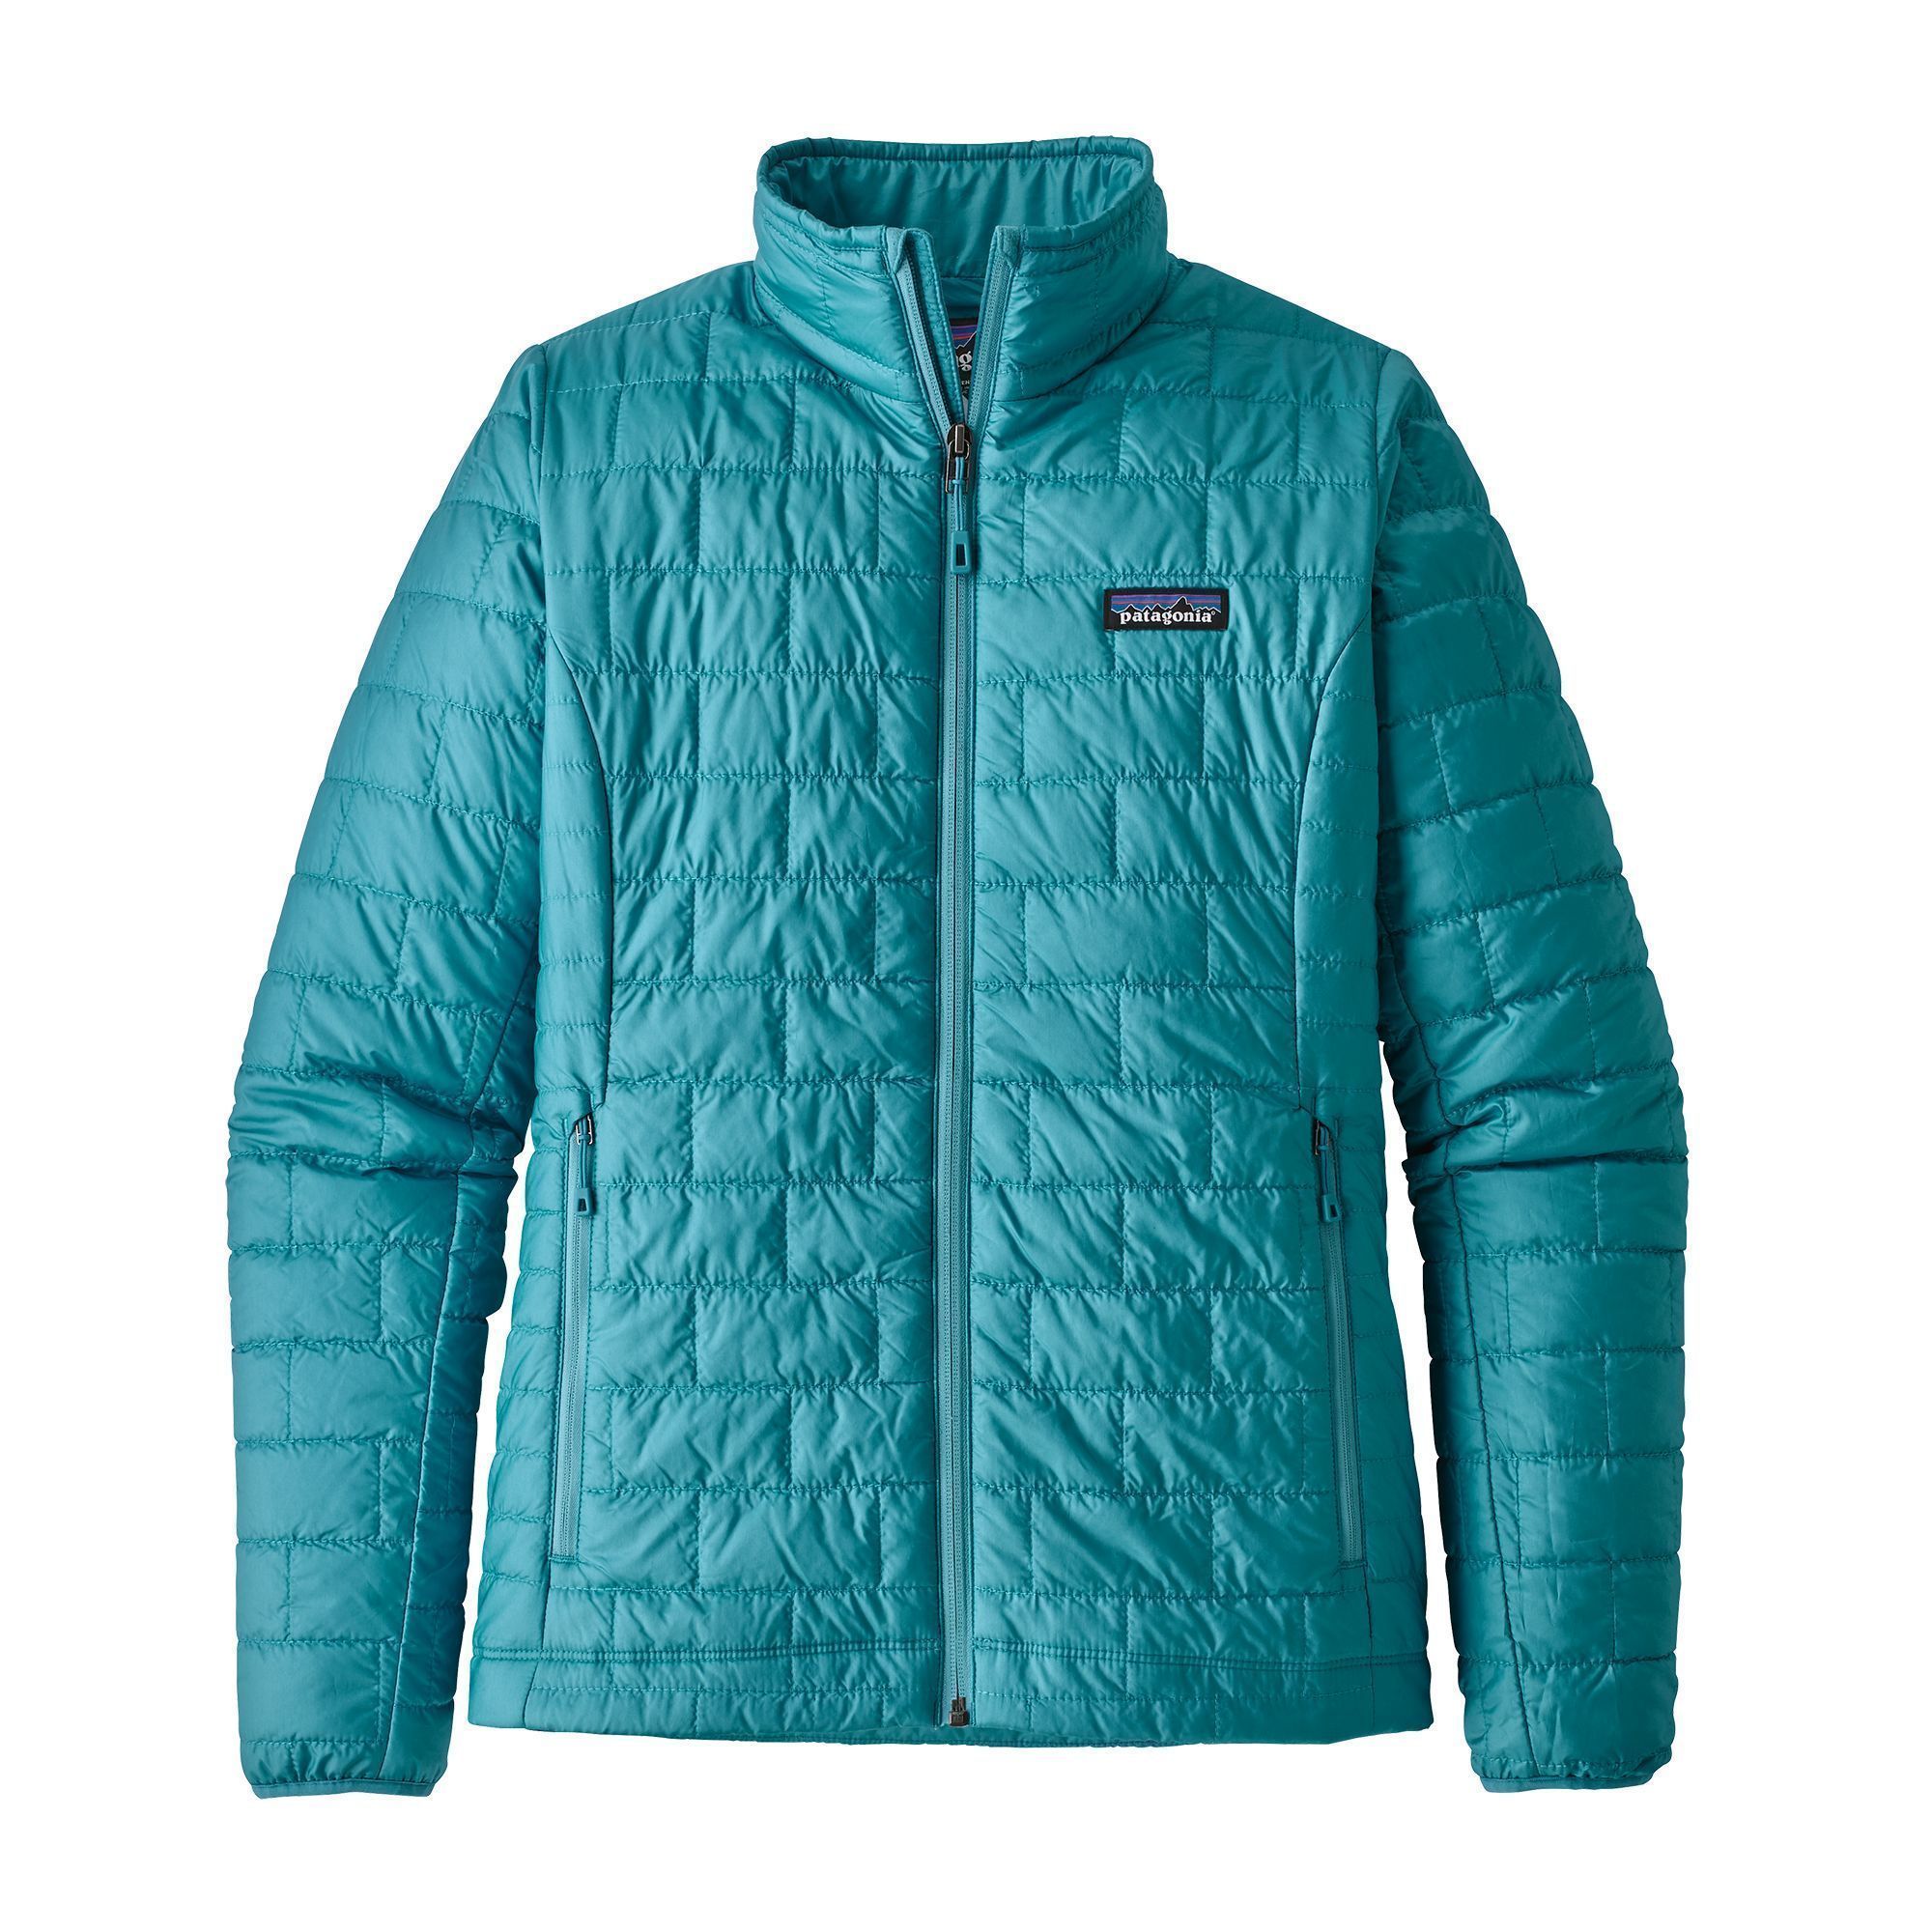 Patagonia Women's Nano Puff® Jacket - Recycled Polyester, Mako Blue / S